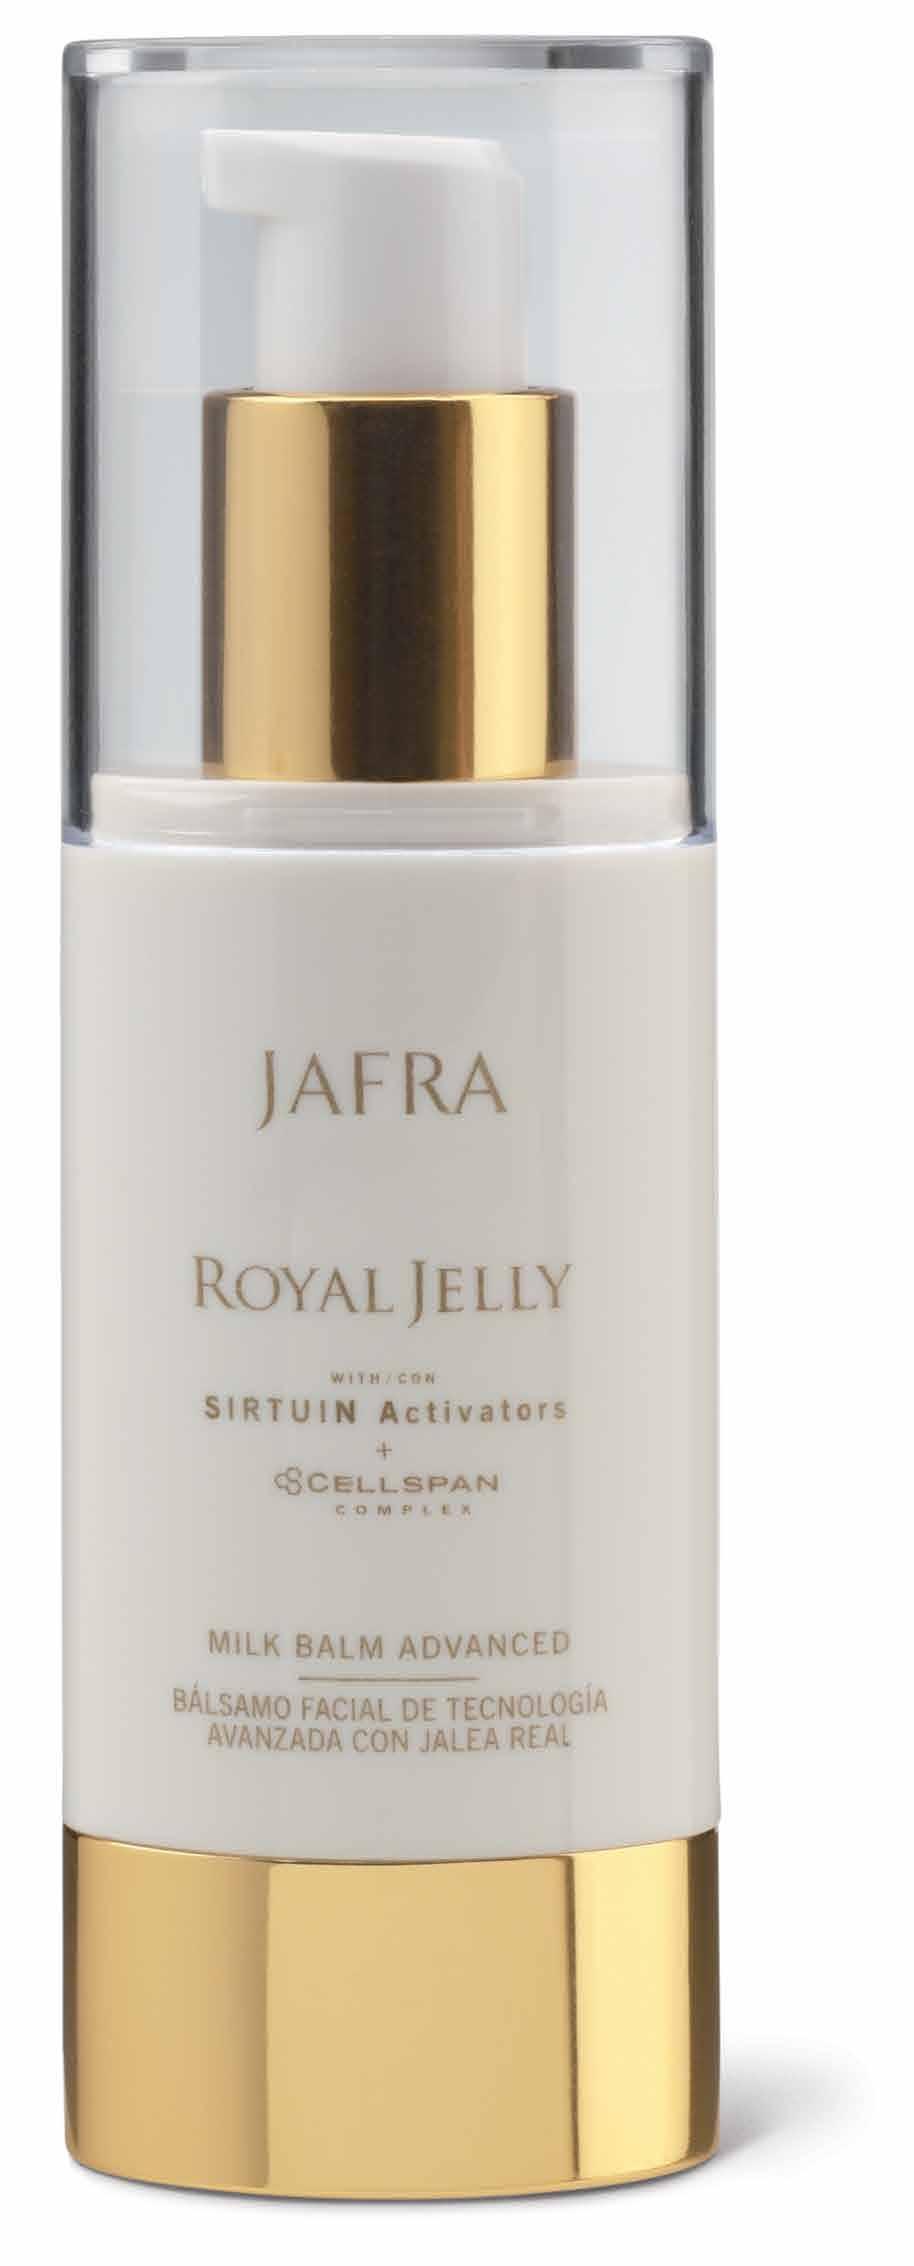 BUZZ worthy Deals like this come but once a year! BONUS-SIZE Royal Jelly Milk Balm Advanced $49* 1.